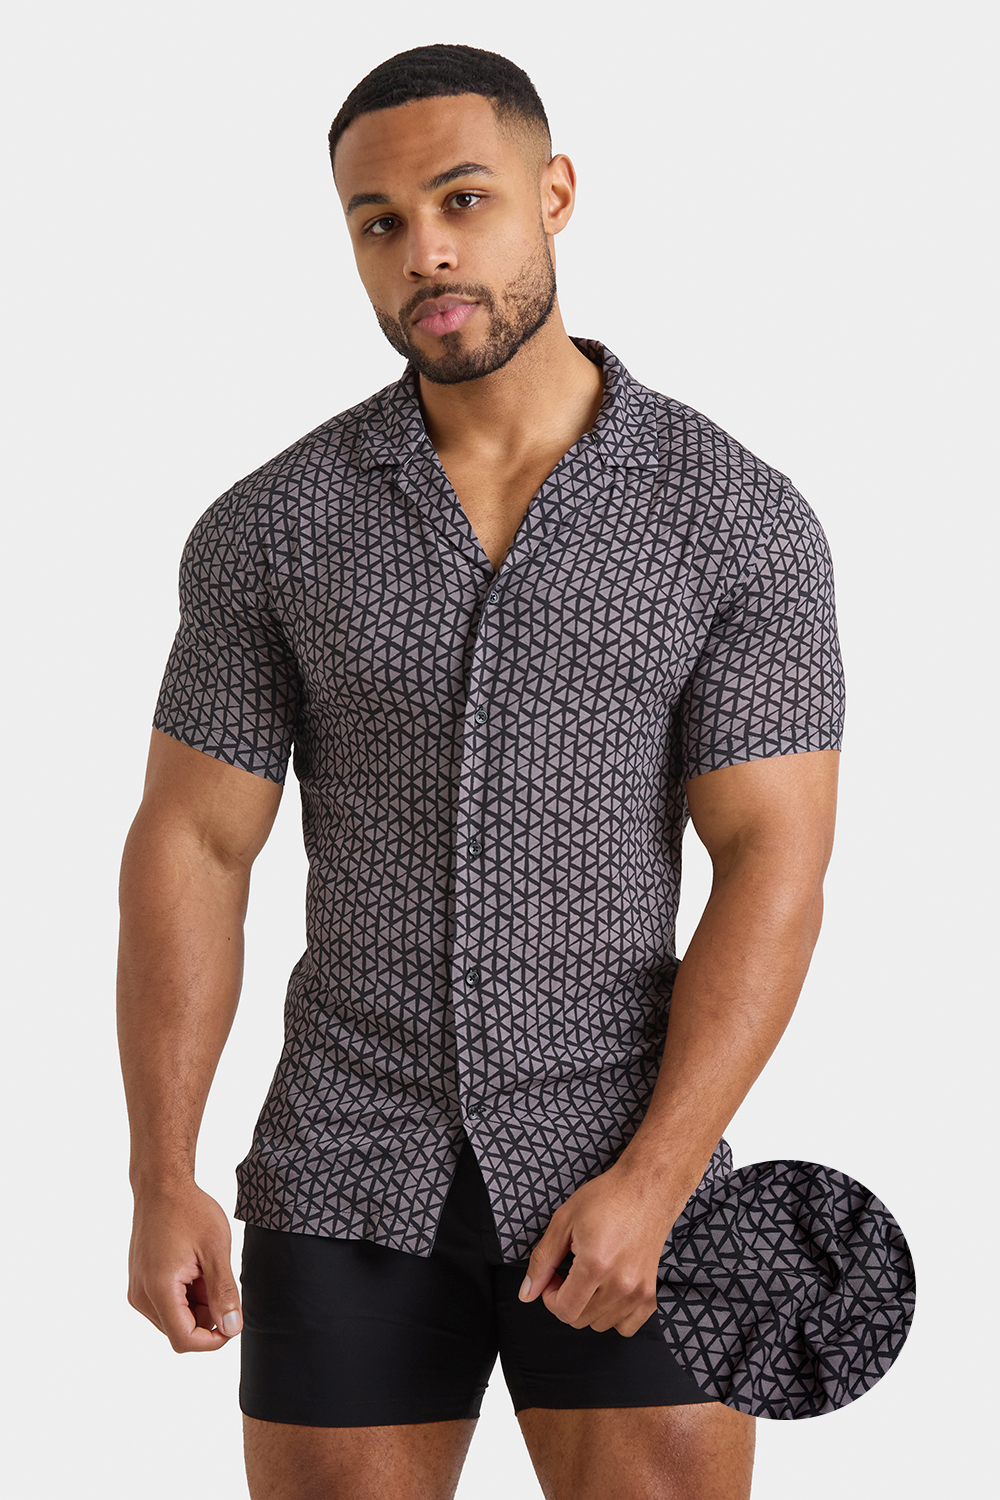 Printed Shirt in Black/Grey Doodle Geo - TAILORED ATHLETE - ROW